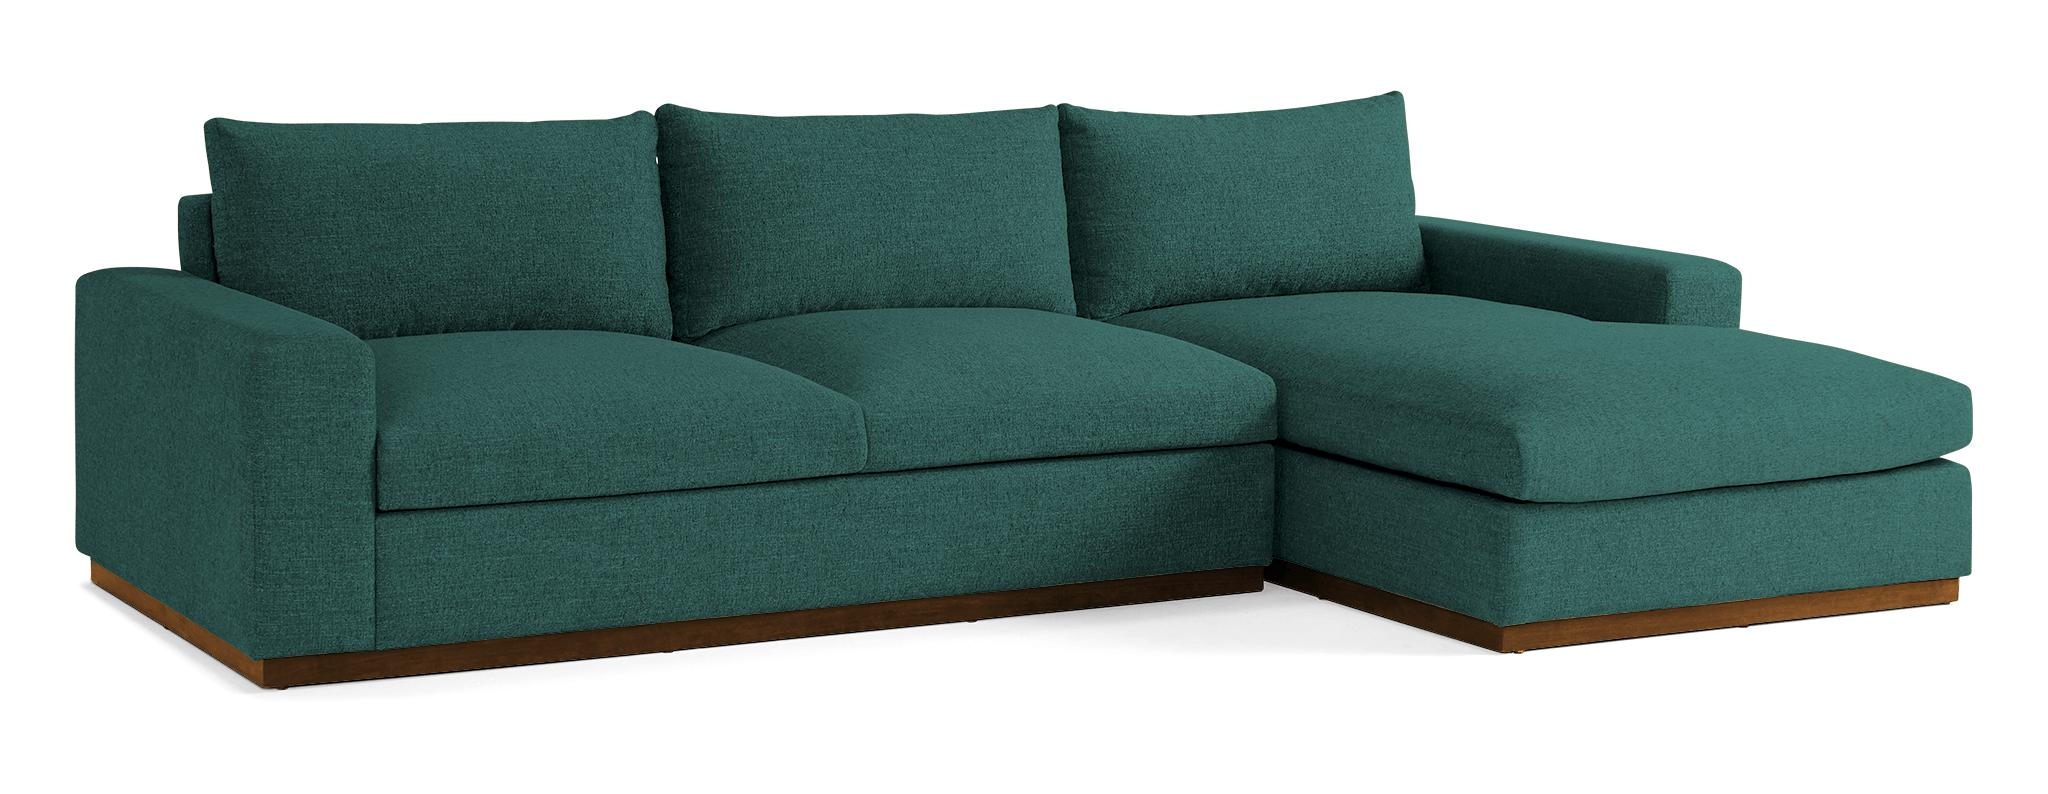 Blue Holt Mid Century Modern Sectional with Storage - Prime Peacock - Mocha - Right - Image 1